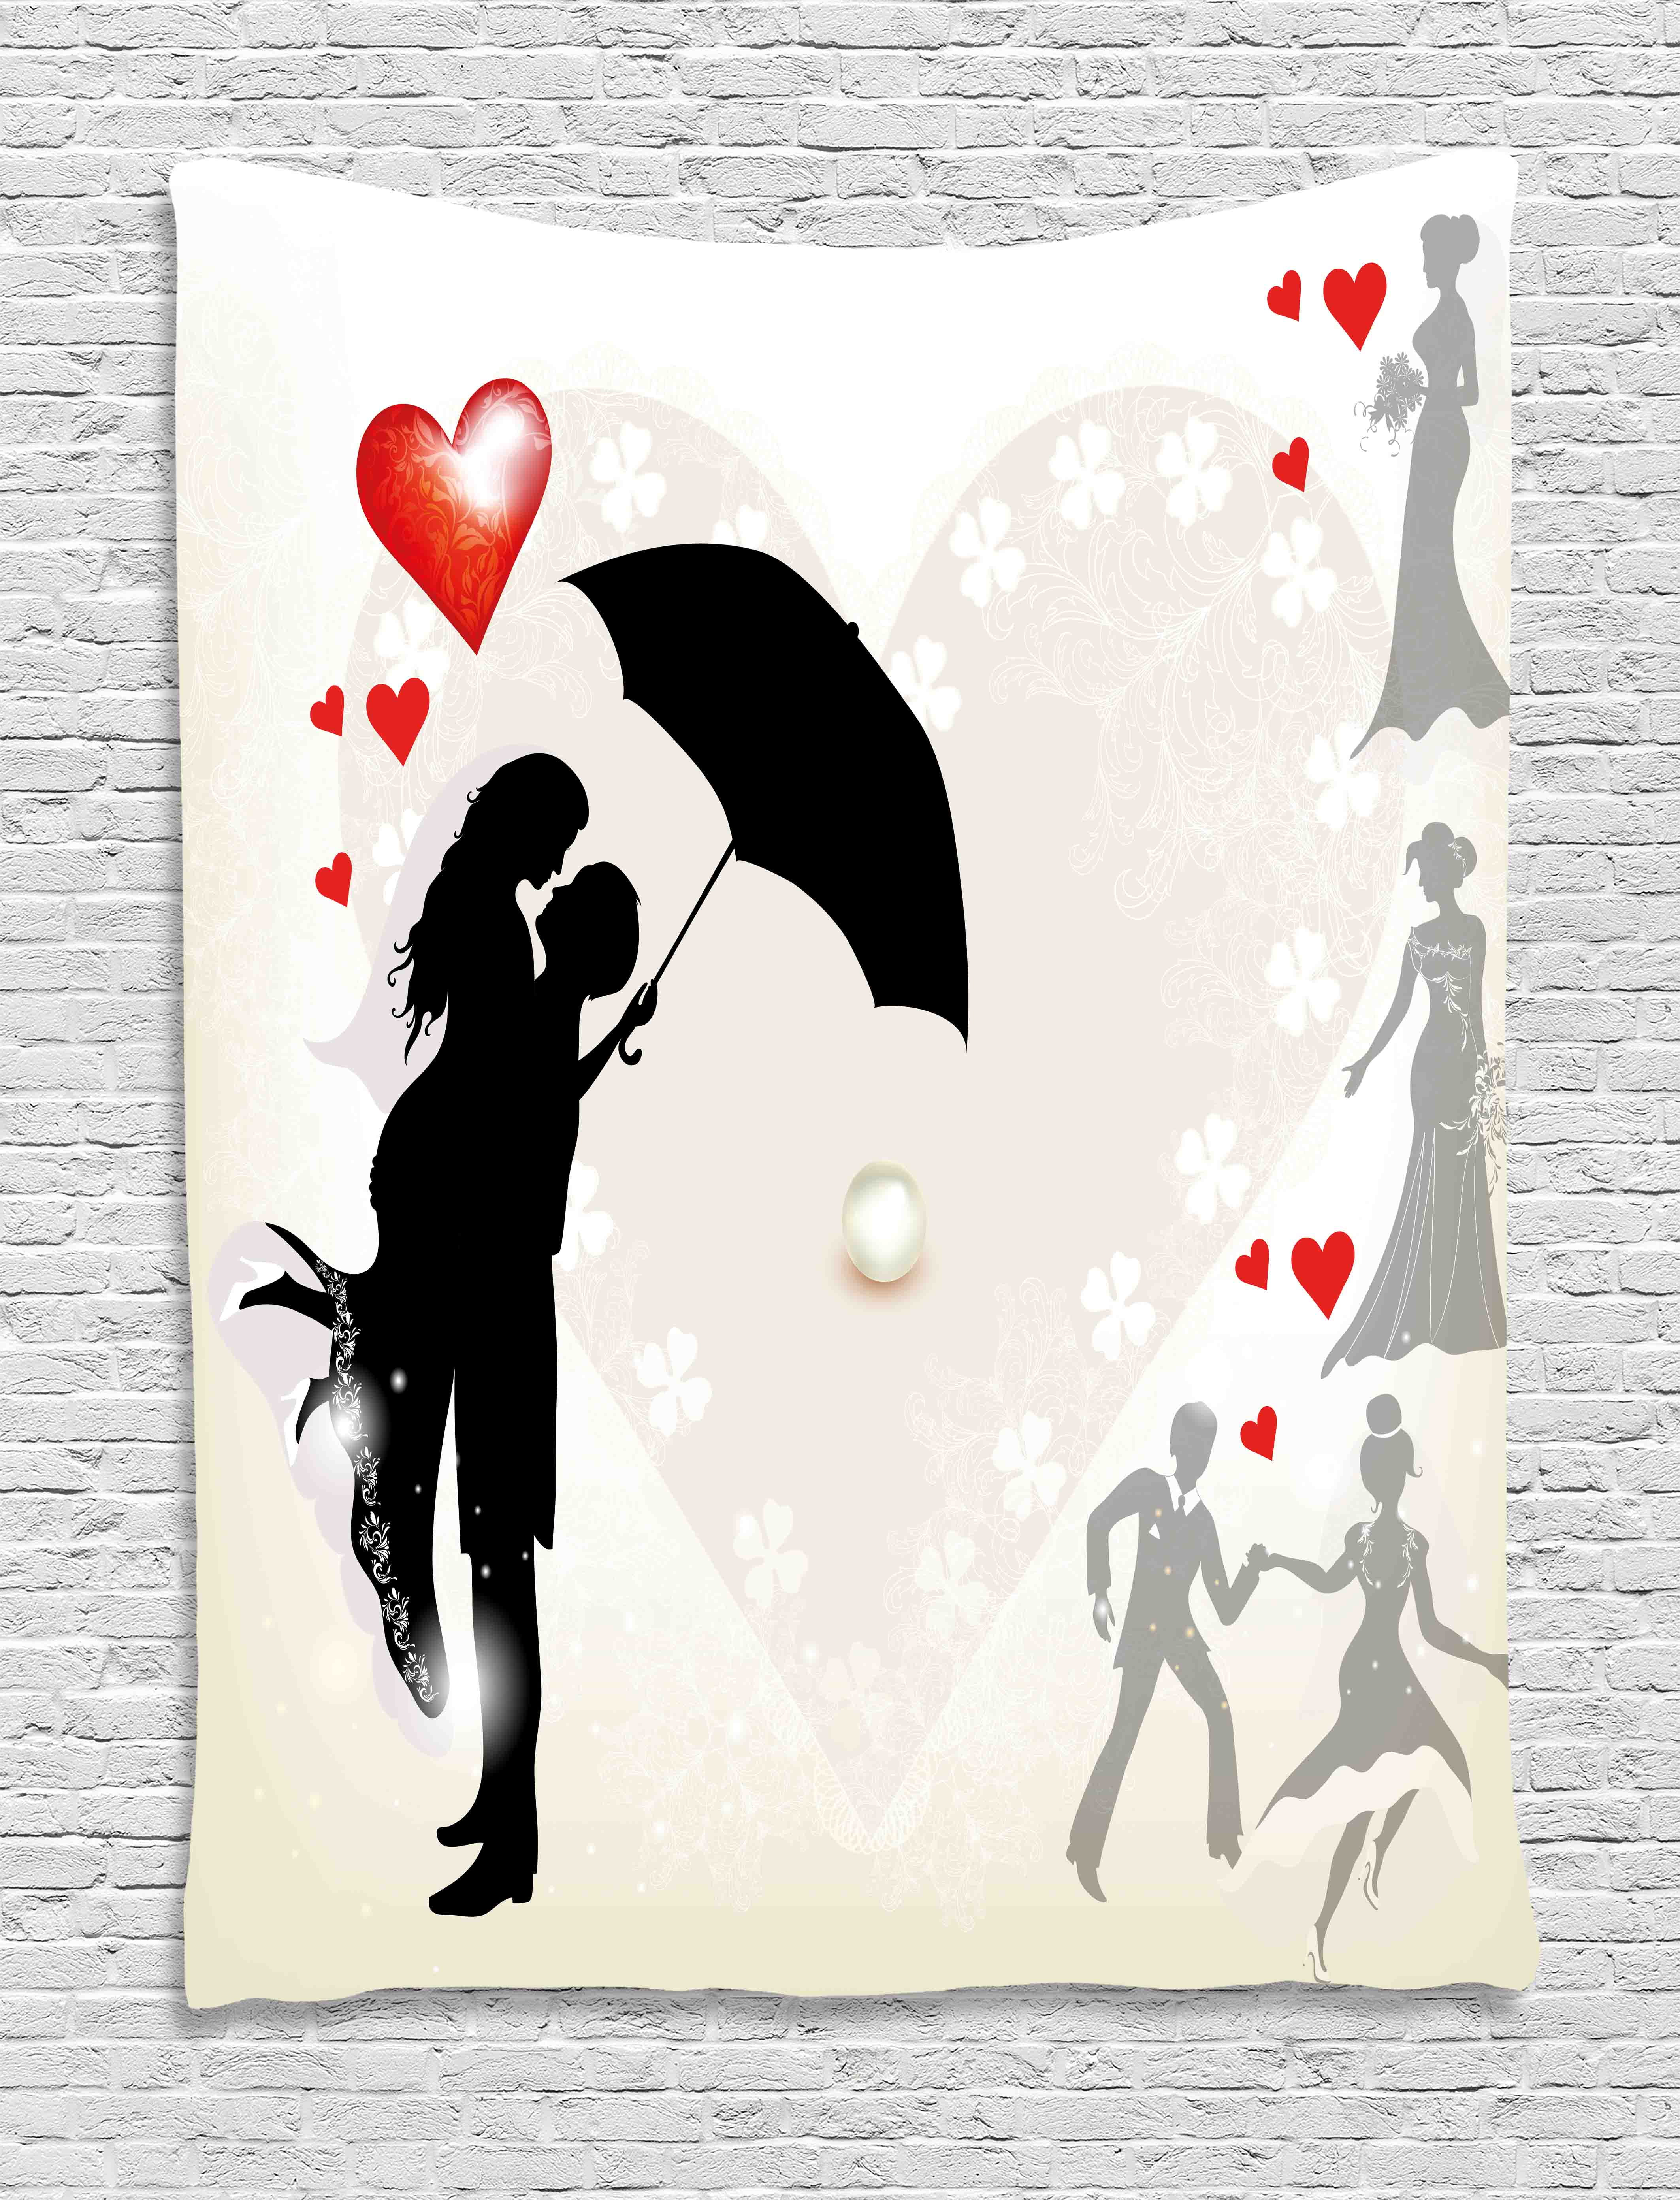 Wedding Tapestry Couple In Love Umbrella Red Hearts Daisies Romance